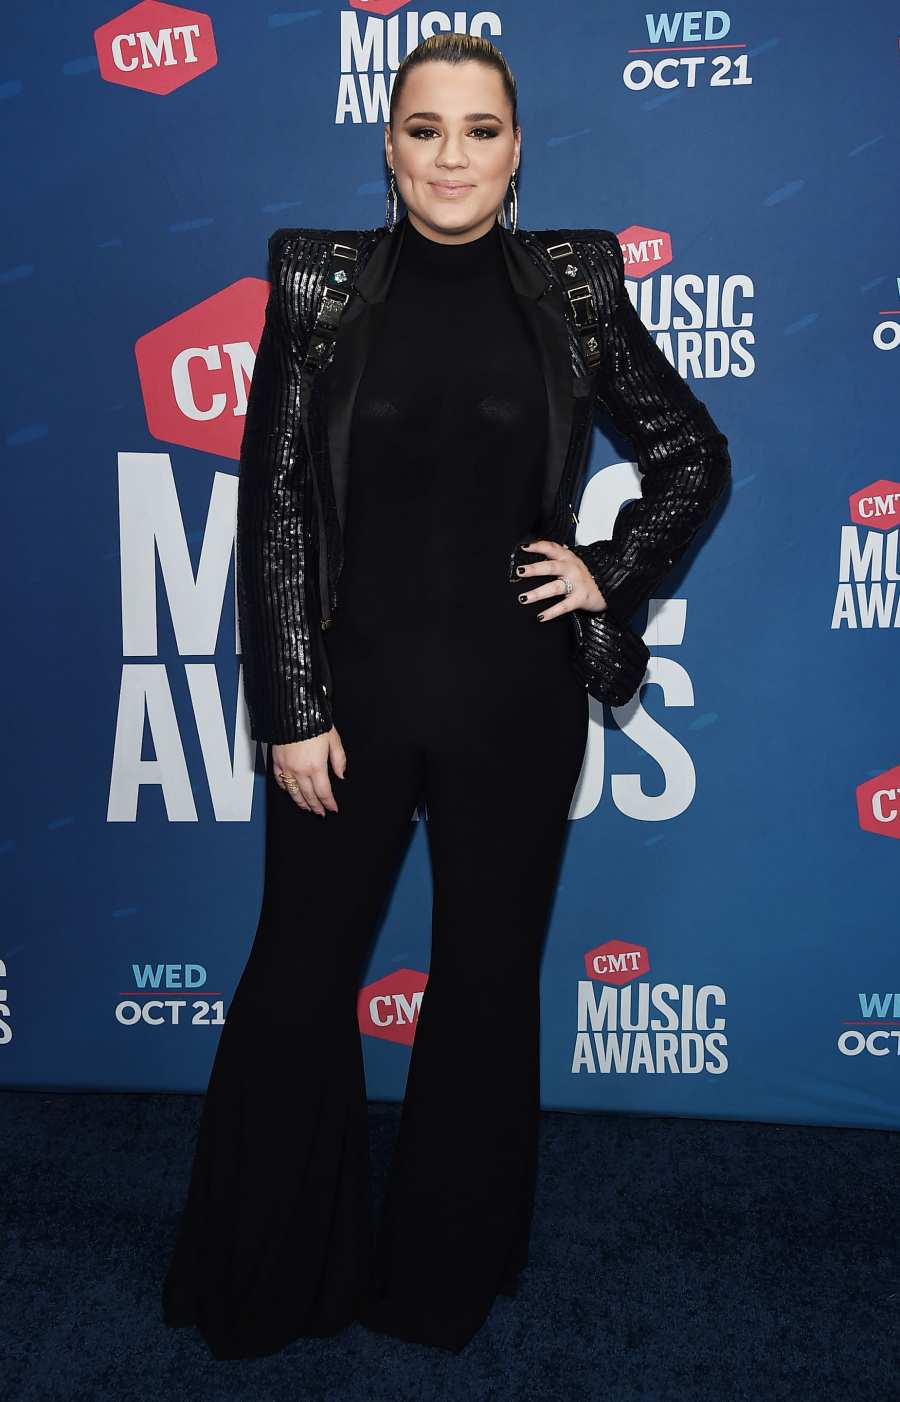 CMT Music Awards 2020 Celebrity Fashion: See the Stars’ Styles